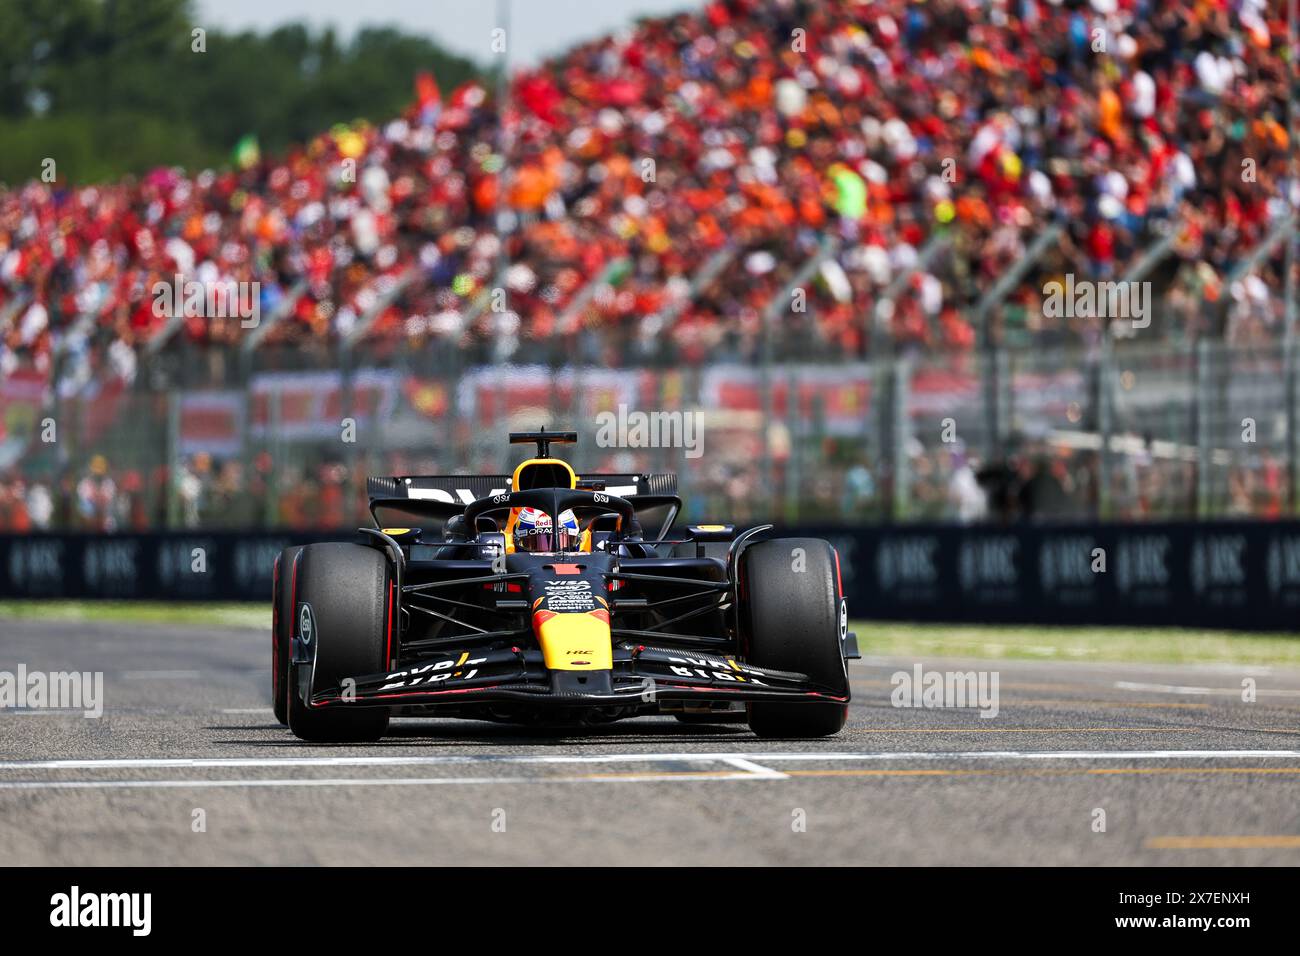 Imola, Italy. 19th May, 2024. Red Bull Racing's Dutch driver Max Verstappen drives into the grid before the Formula One Emilia Romagna Grand Prix at the Autodromo Internazionale Enzo e Dino Ferrari race track in Imola, Italy, May 19, 2024. Credit: Qian Jun/Xinhua/Alamy Live News Stock Photo